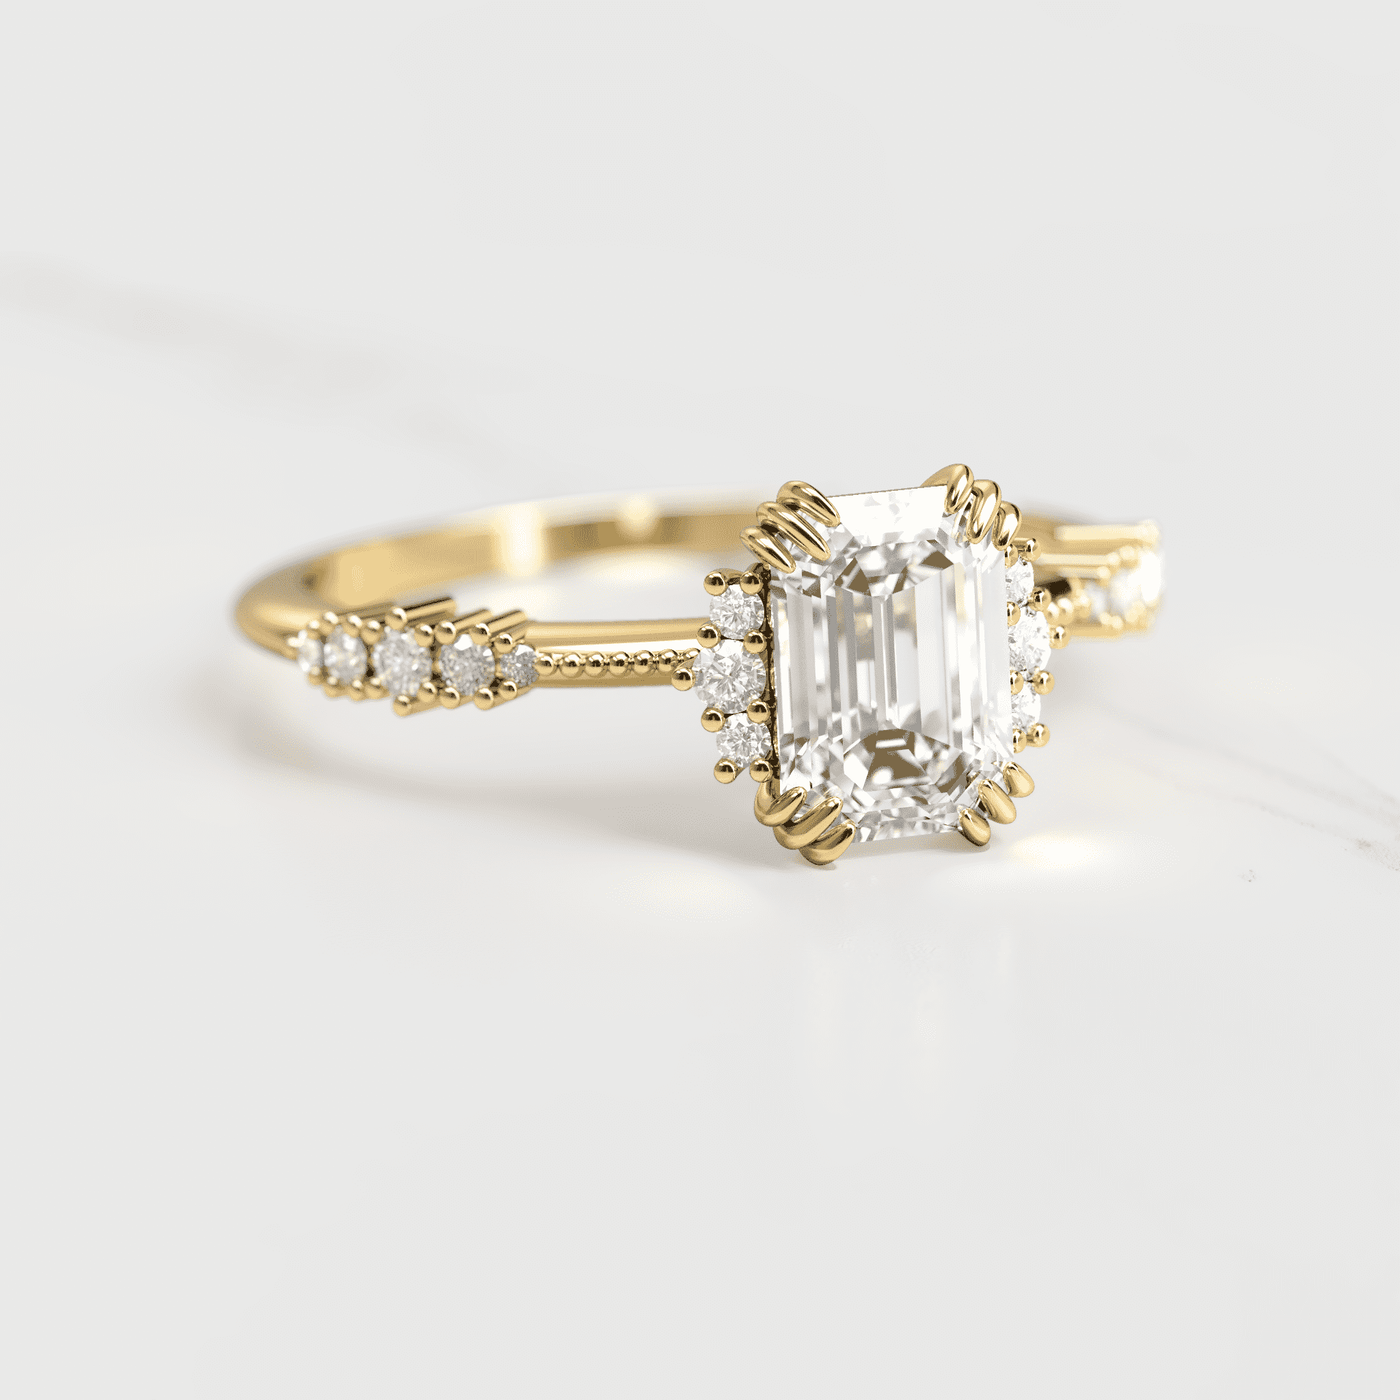 Emerald-Cut White Diamond Cluster Ring with Side White Diamonds